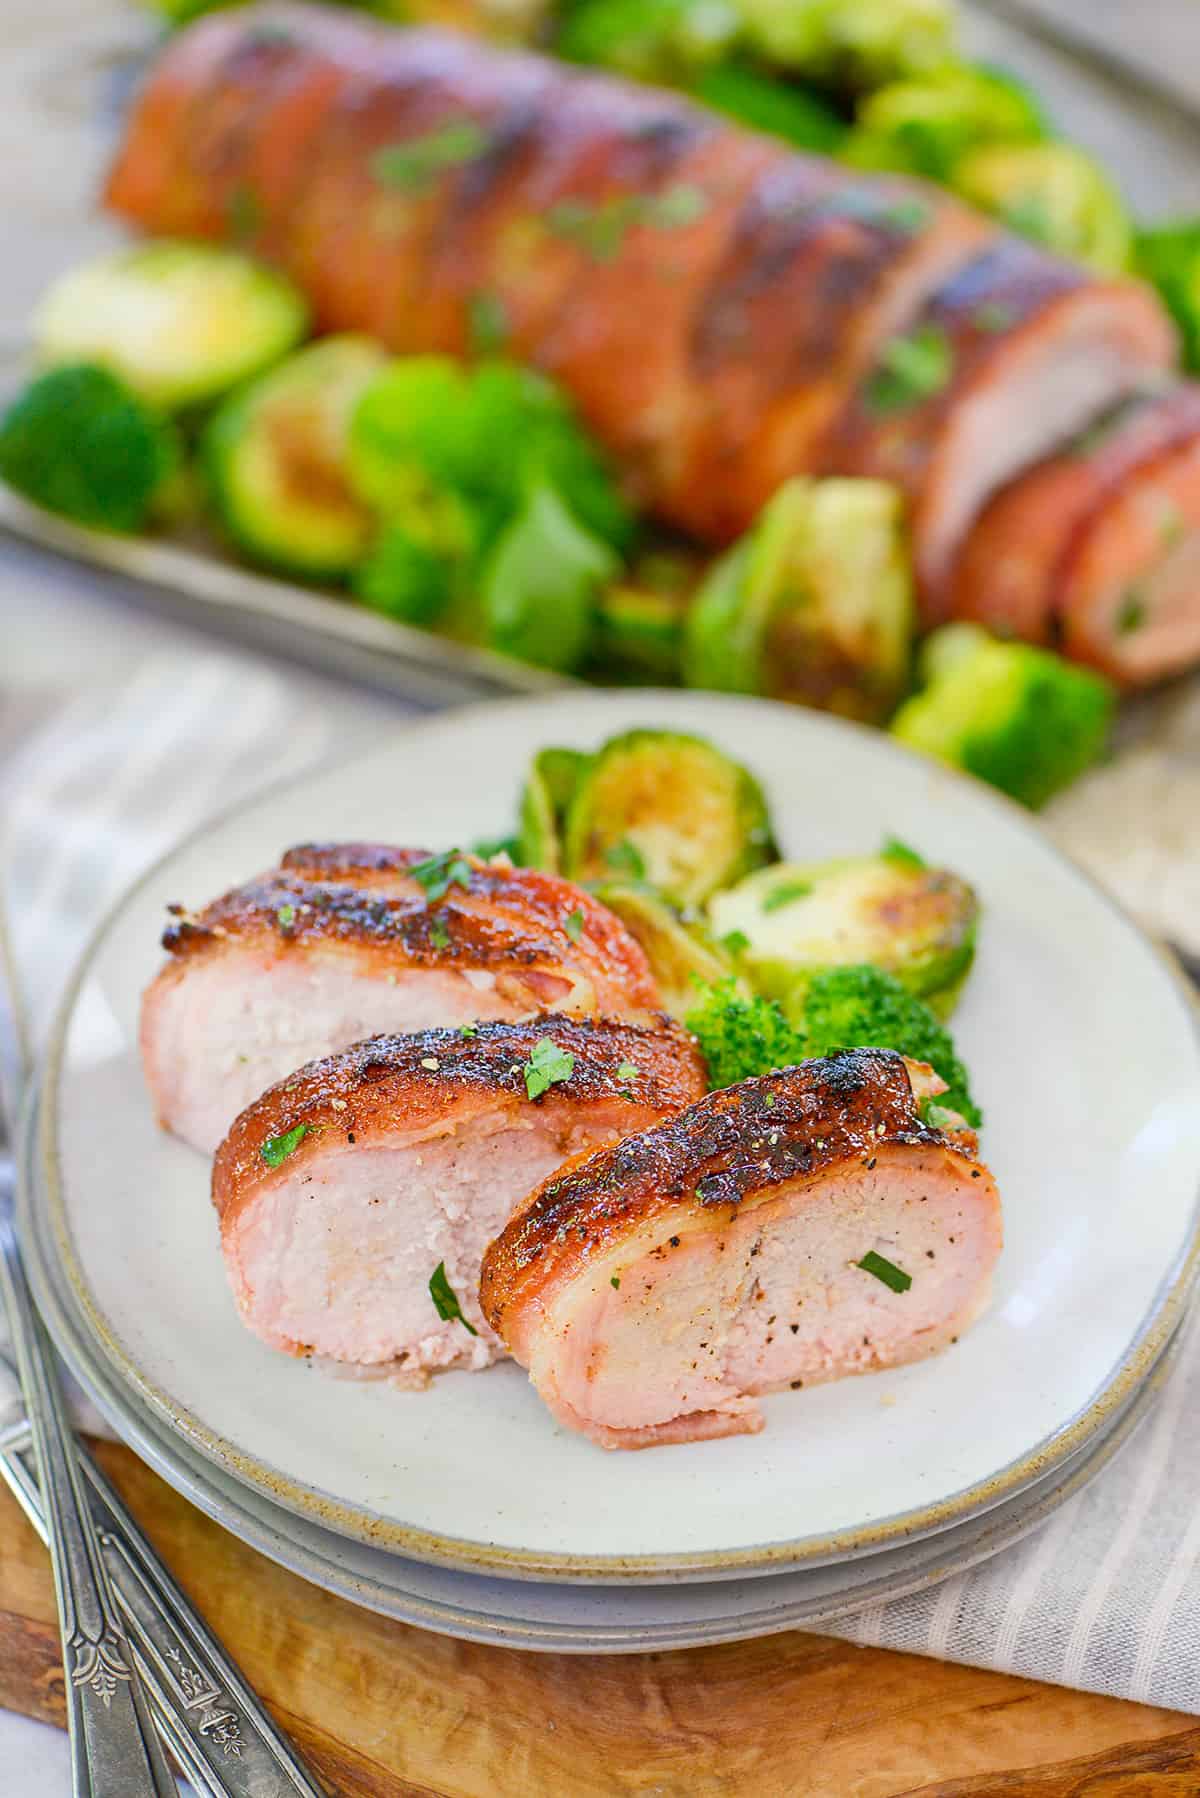 sliced pork tenderloin on plate with broccoli and brussels sprouts.